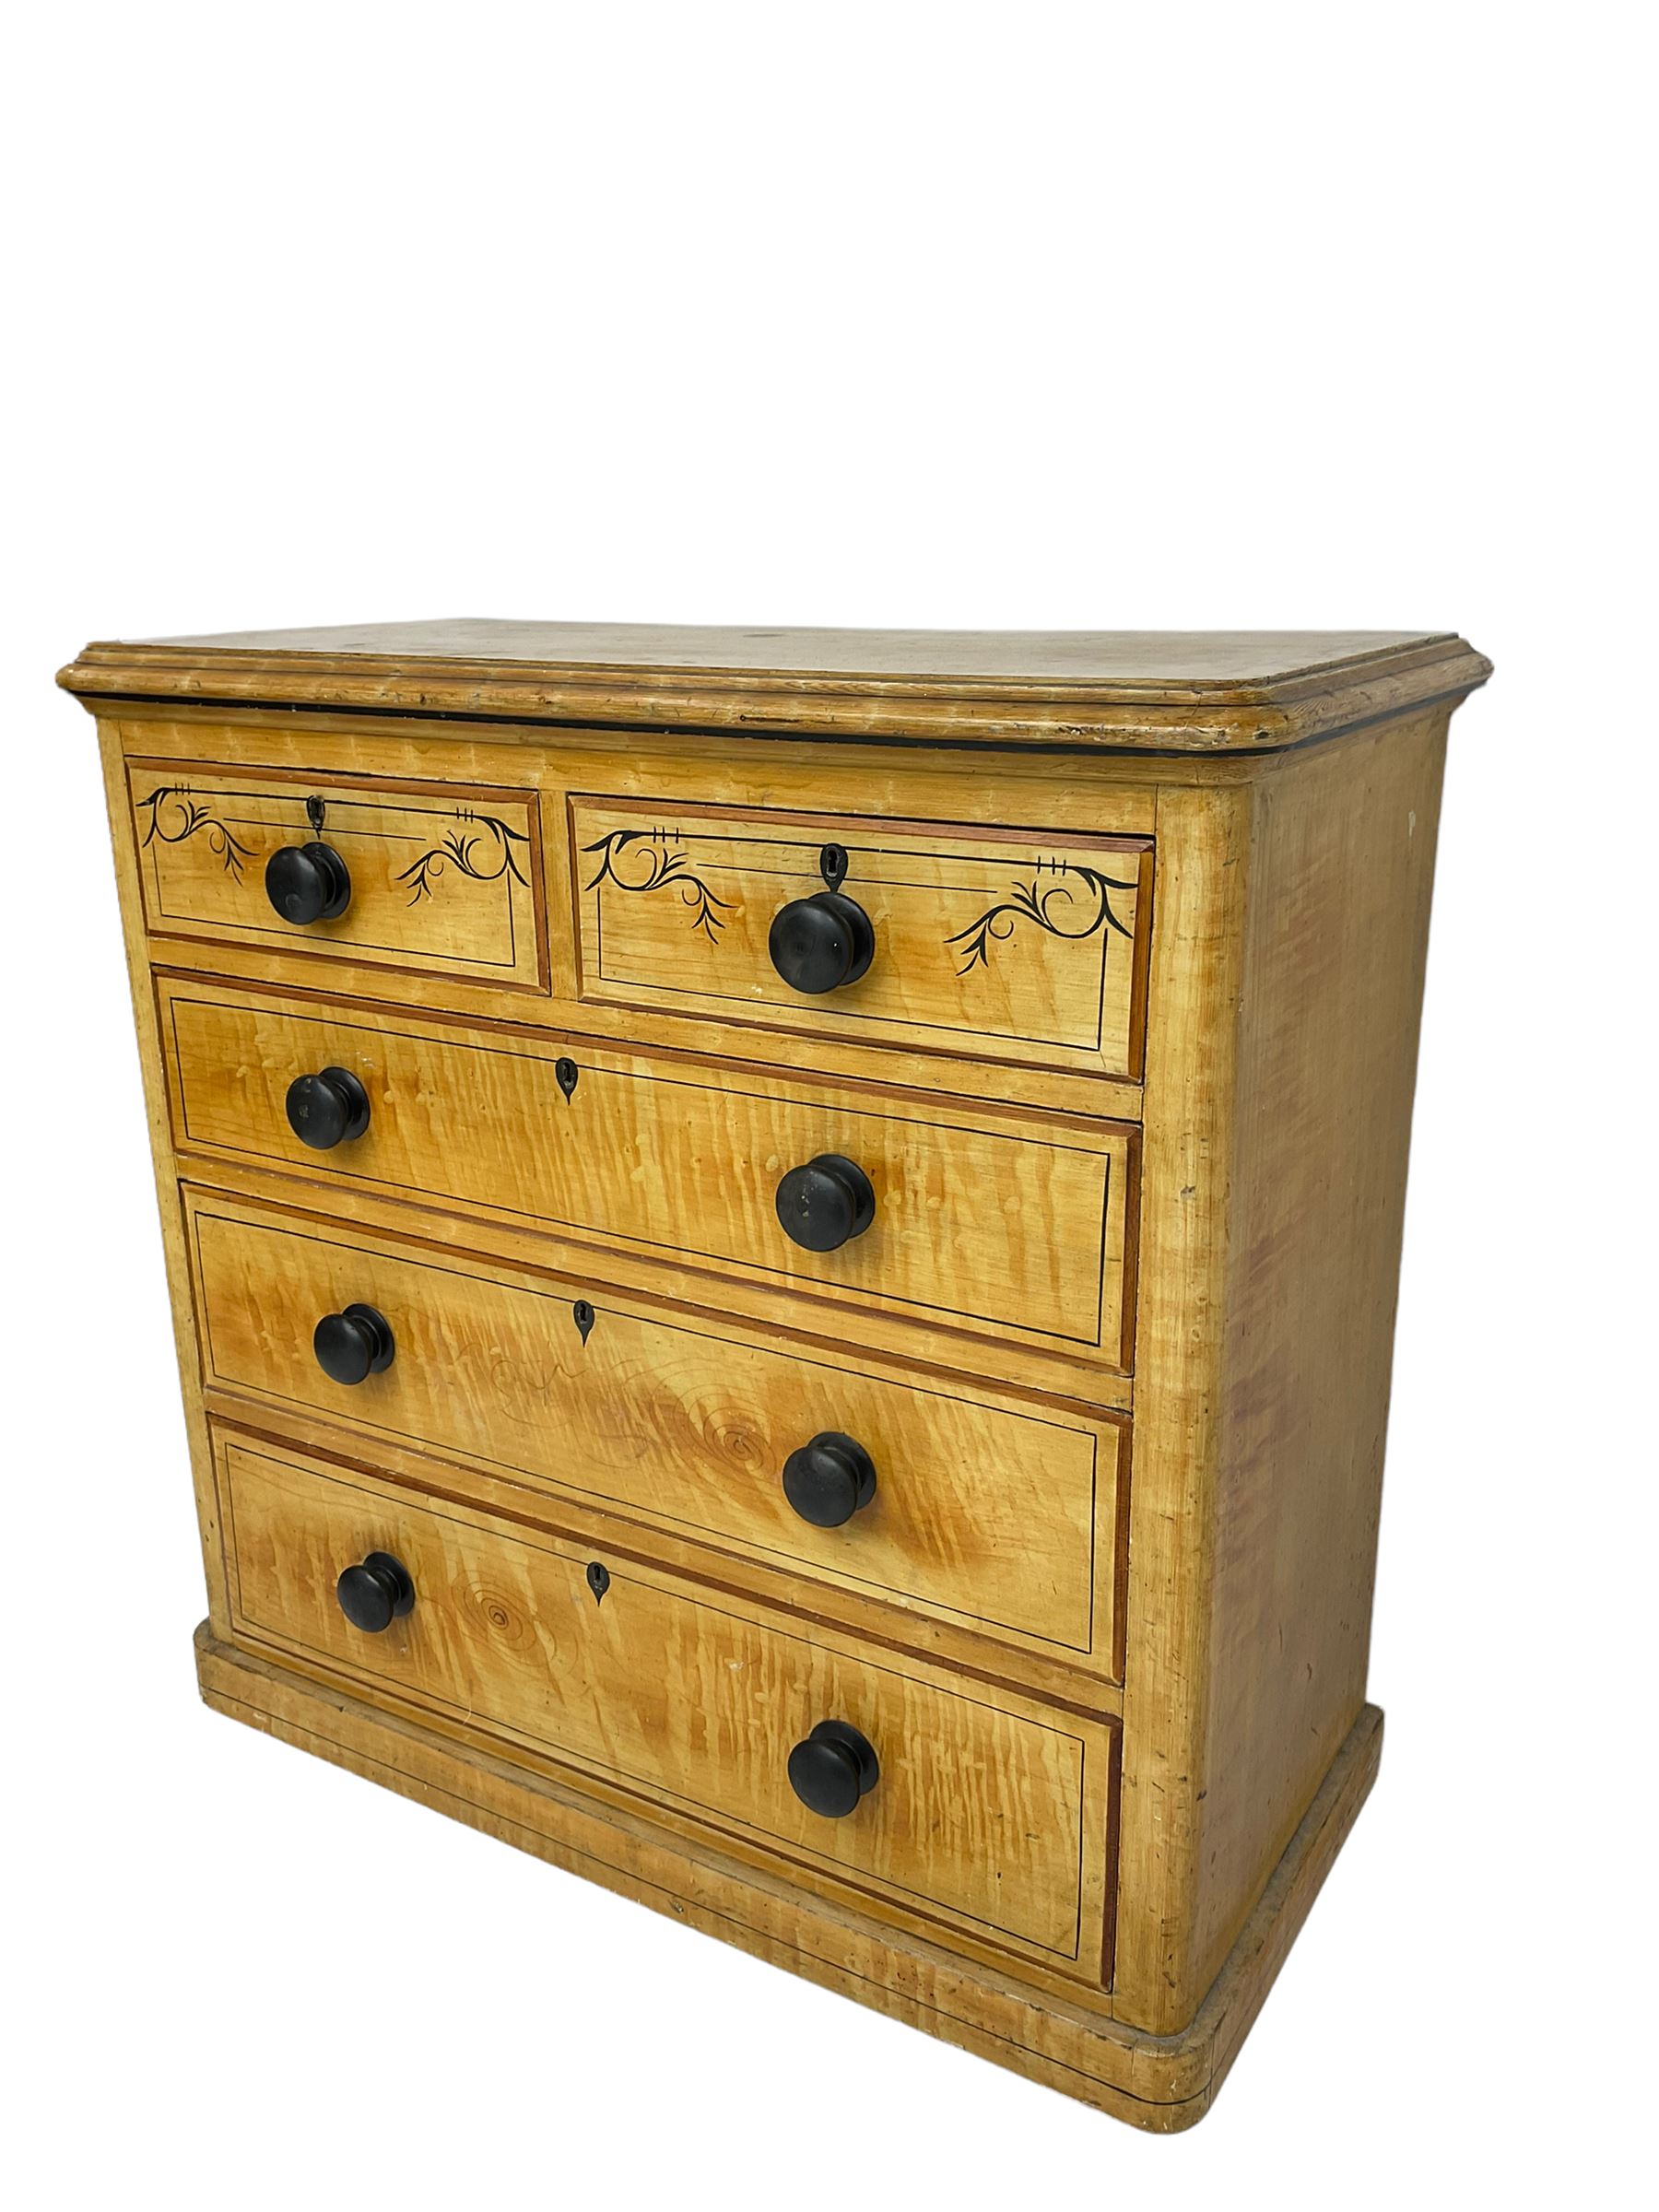 Victorian scumbled painted pine chest - Image 4 of 7